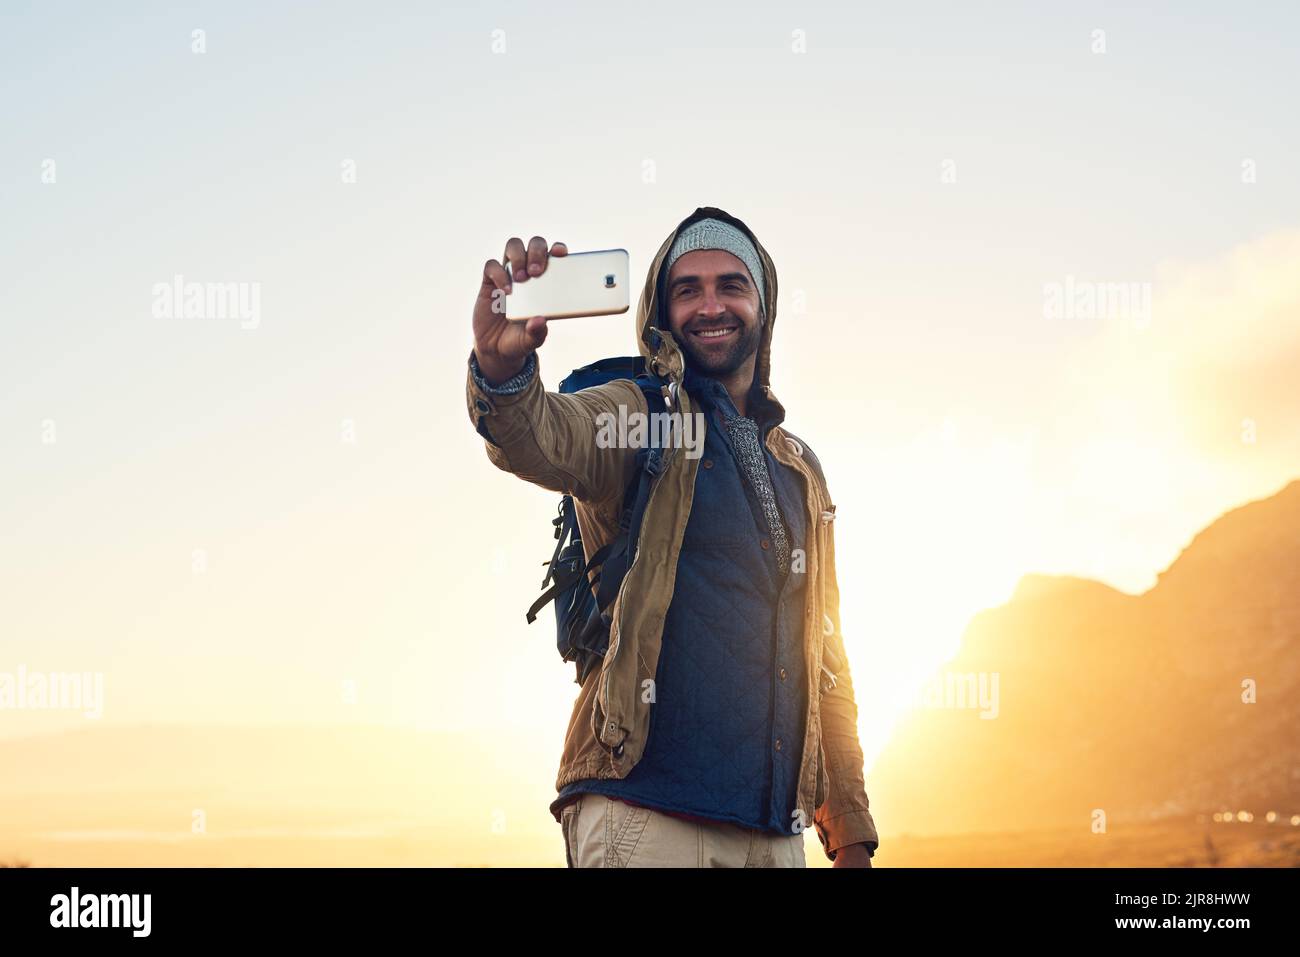 Here is proof I finished the hike. a handsome hiker on top of a mountain taking a selfie. Stock Photo